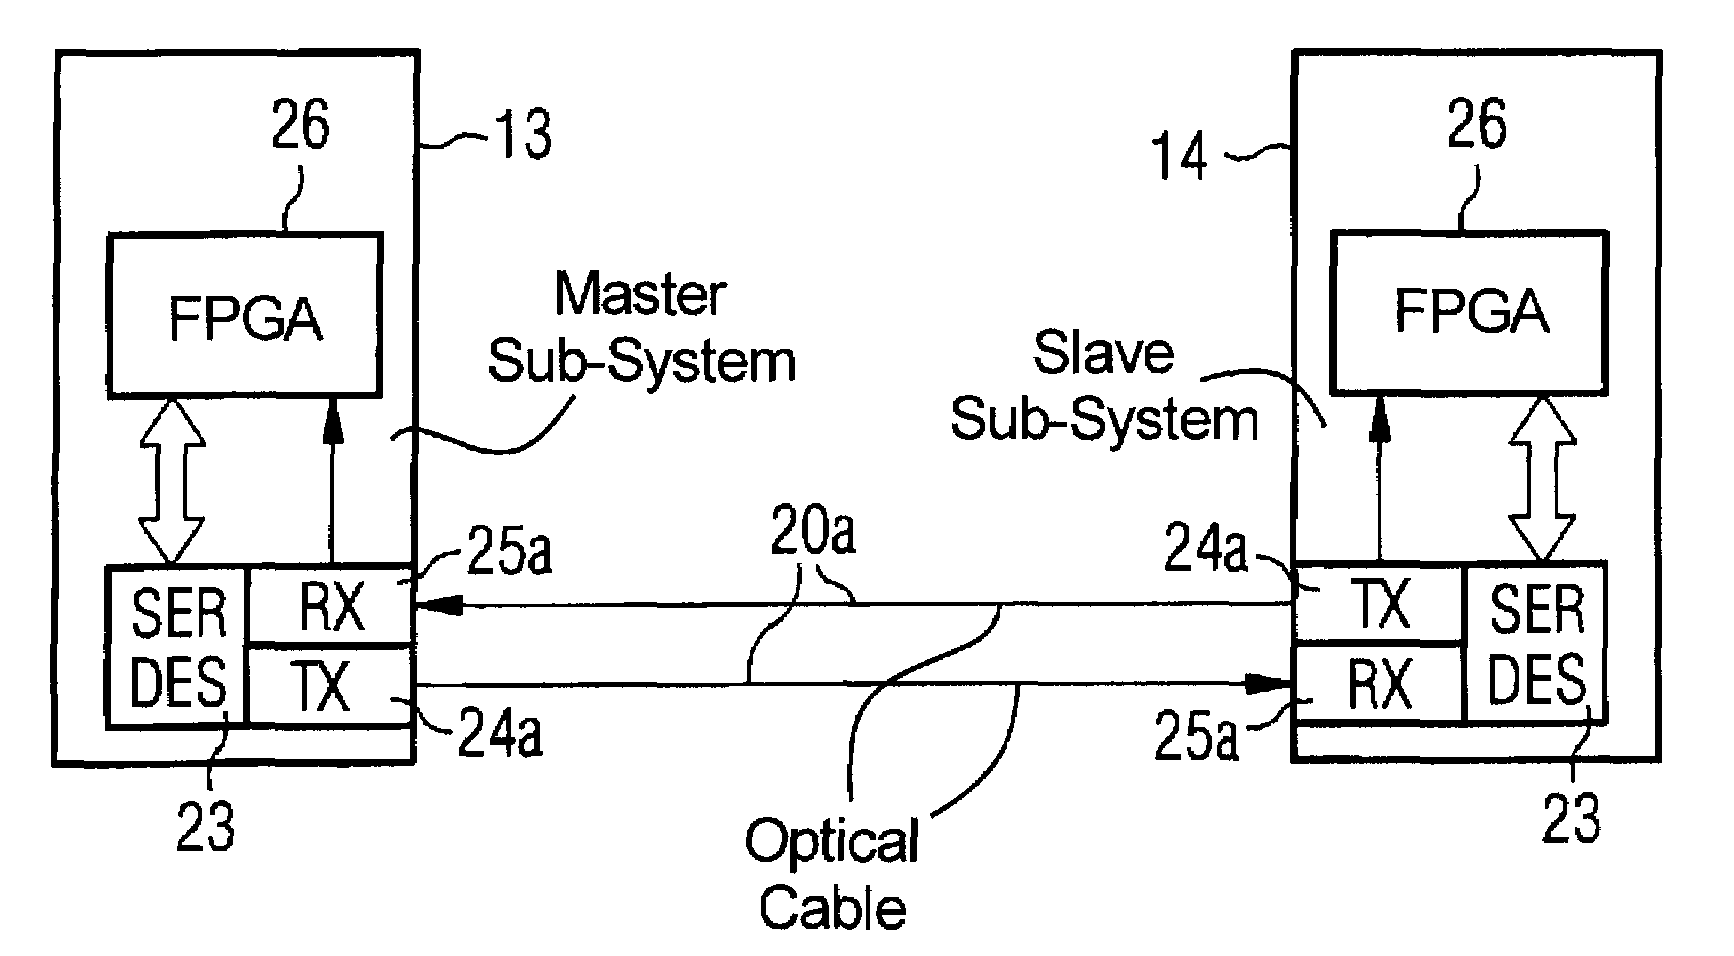 Method for data and signal transfer between different sub-units of a medically-related system